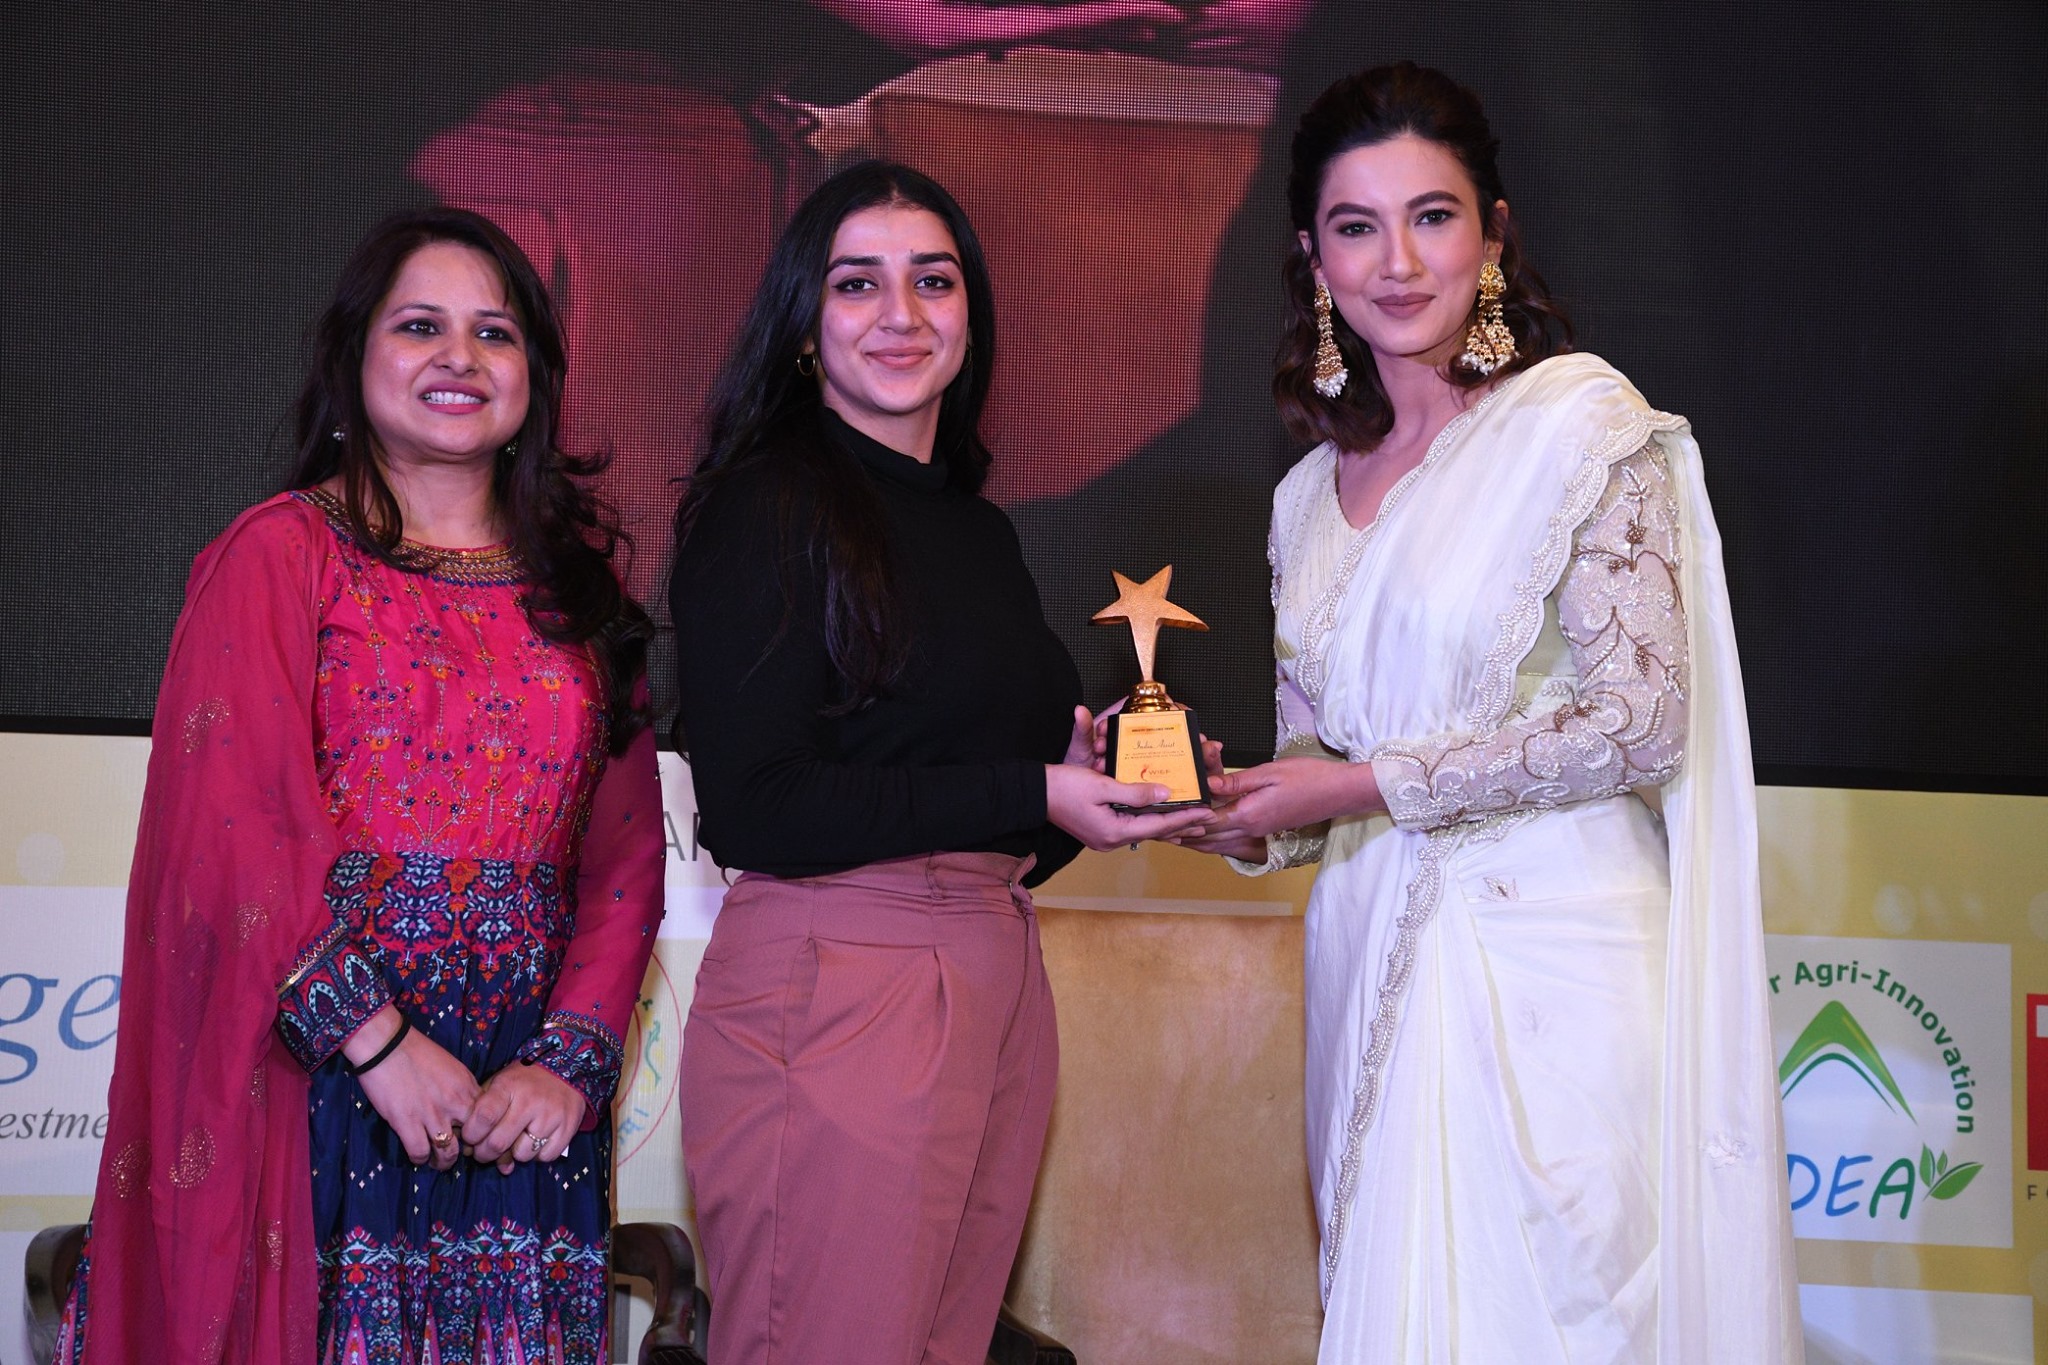 India Assist awarded the Indian Women Excellence and Leadership Award by the Women Innovation Entrepreneurship Foundation